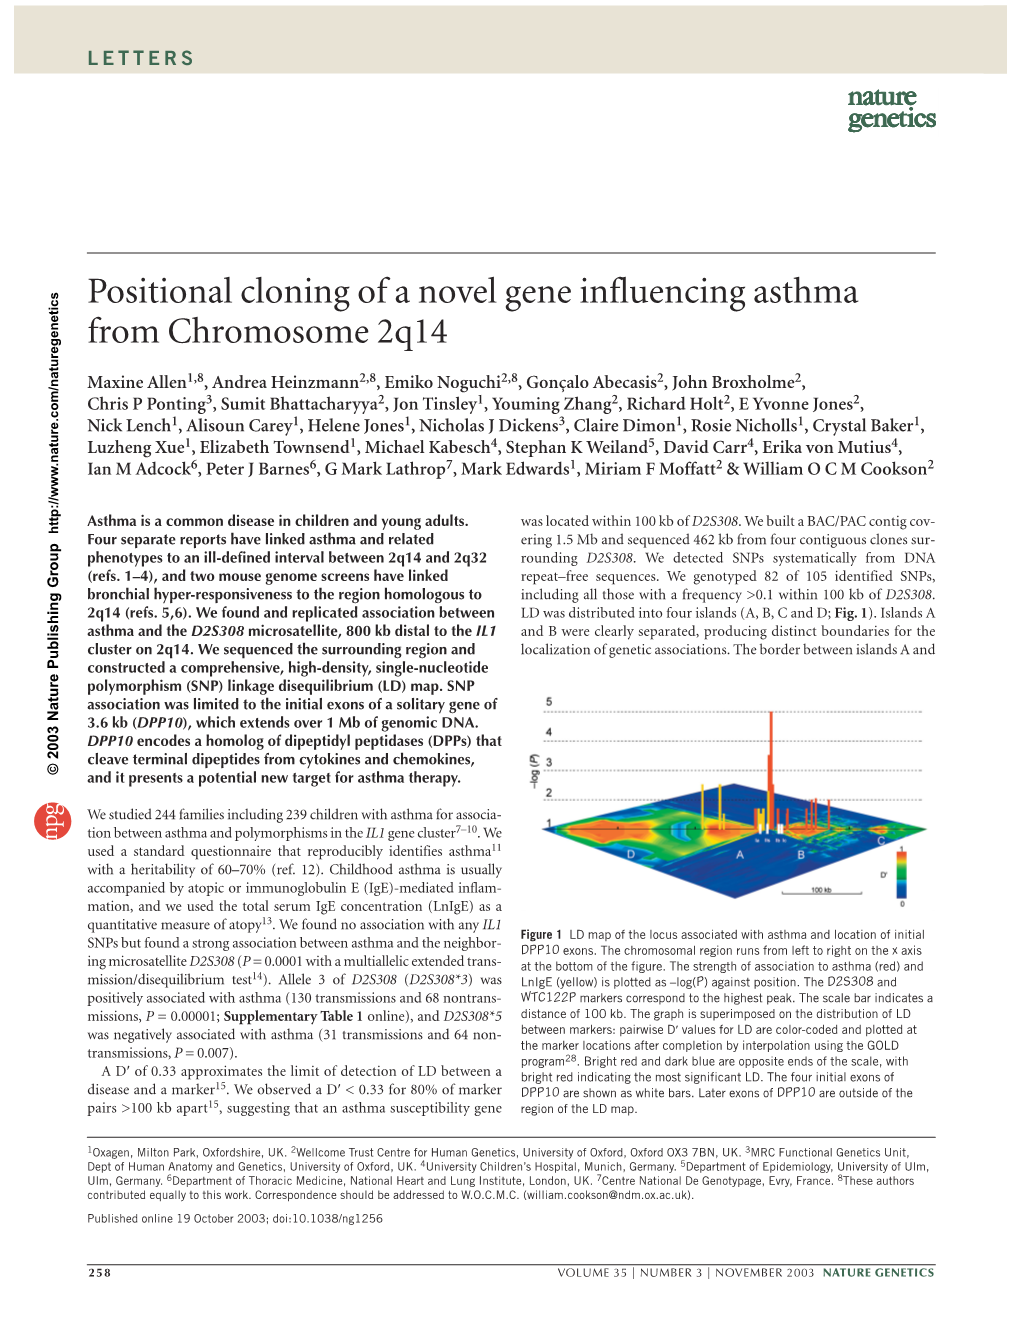 Positional Cloning of a Novel Gene Influencing Asthma from Chromosome 2Q14